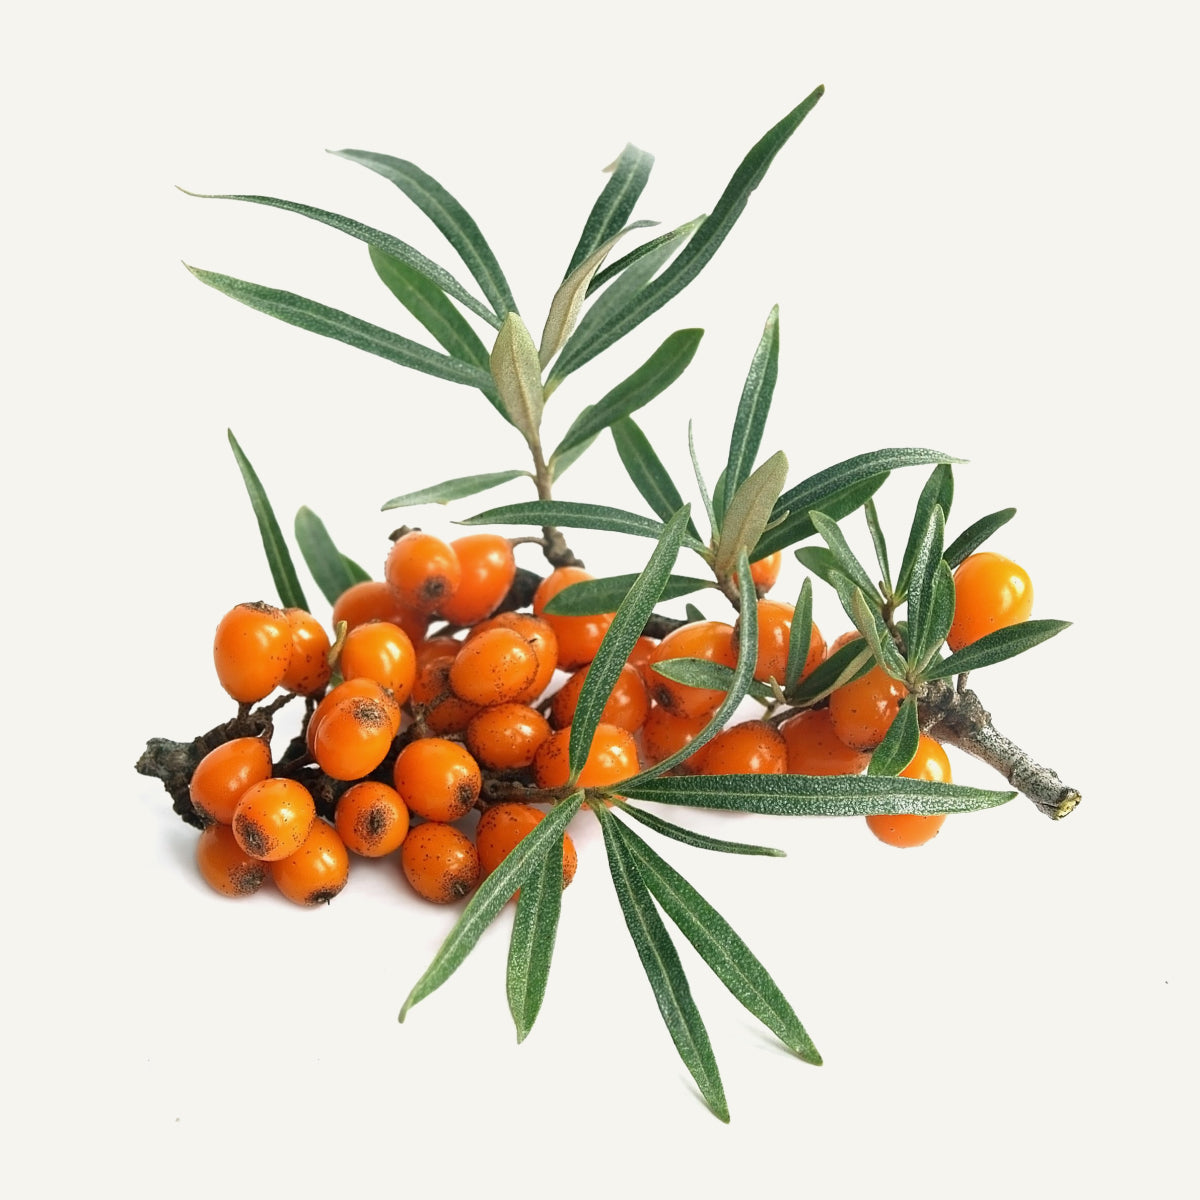 What Is Sea Buckthorn?